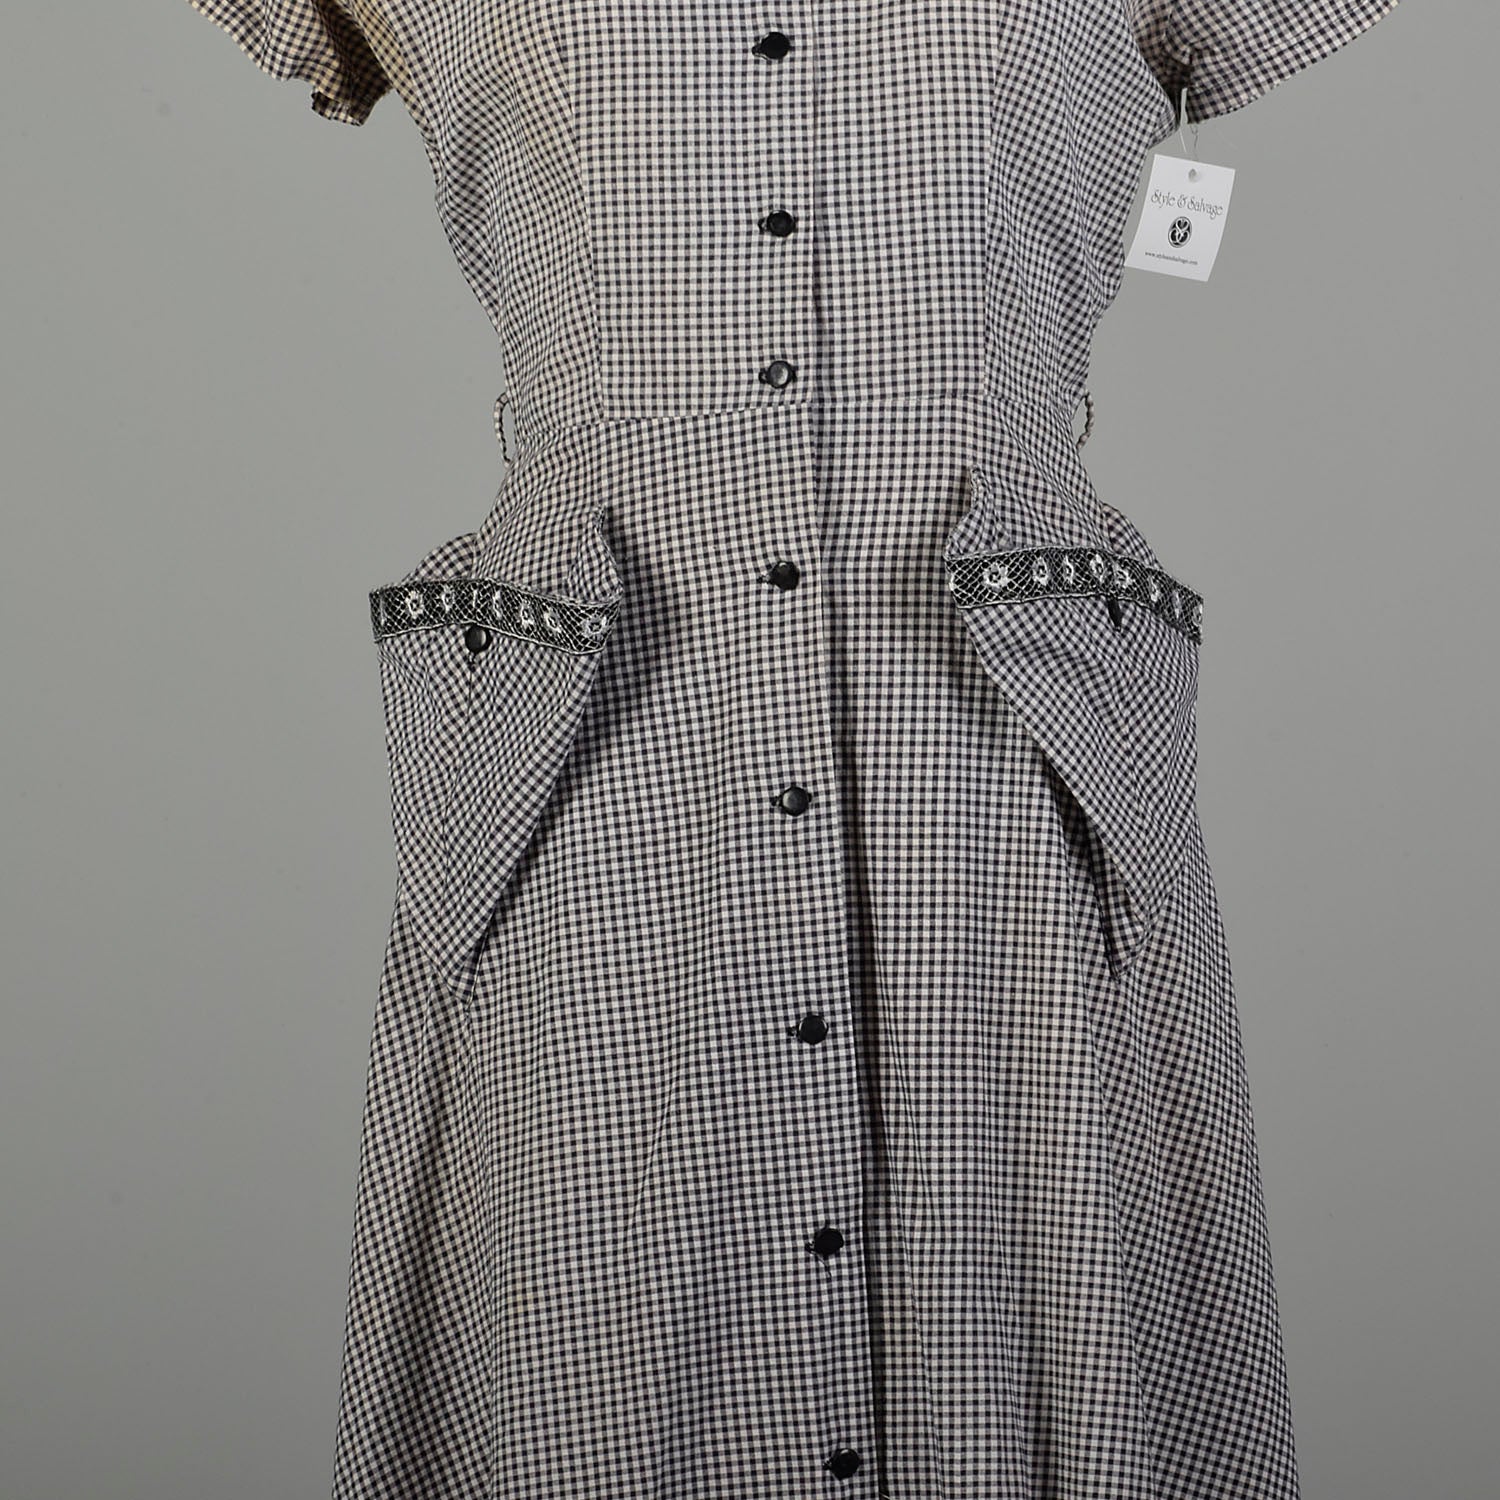 Large 1950s Blue & White Checked Fit & Flare Short Sleeve Lightweight Cotton Day Dress